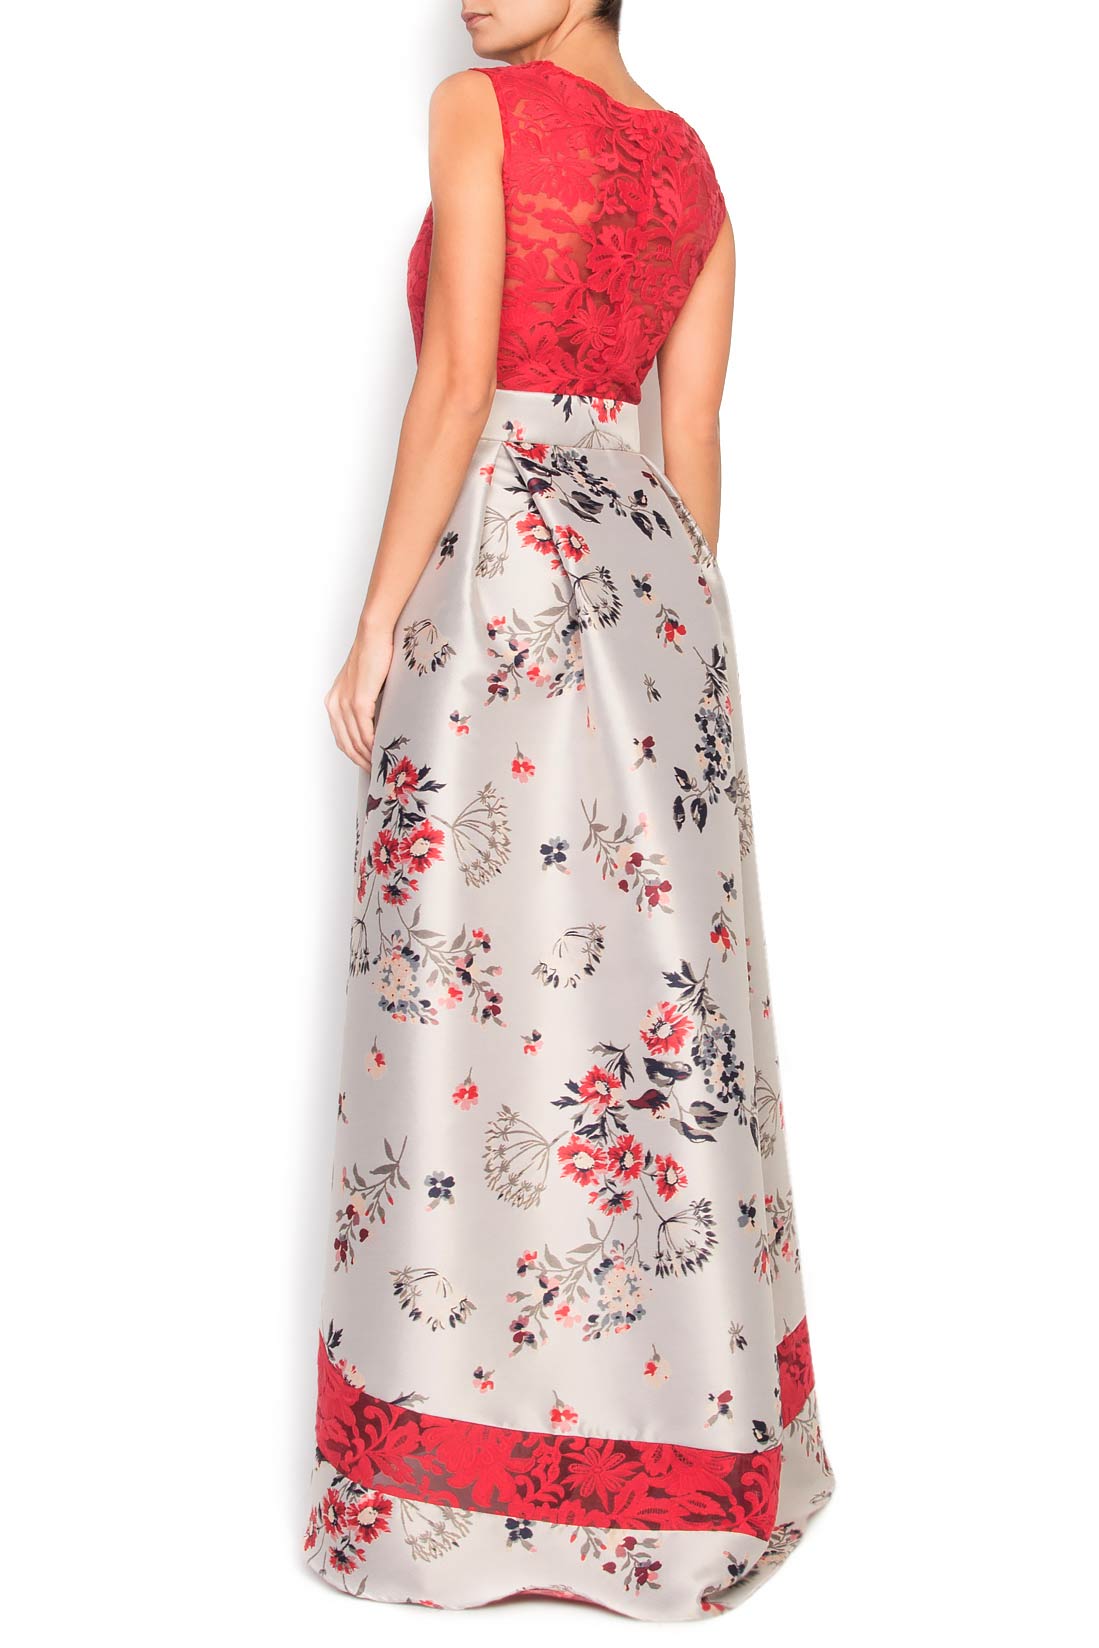 Cloth dress with floral print and lace Elena Perseil image 2